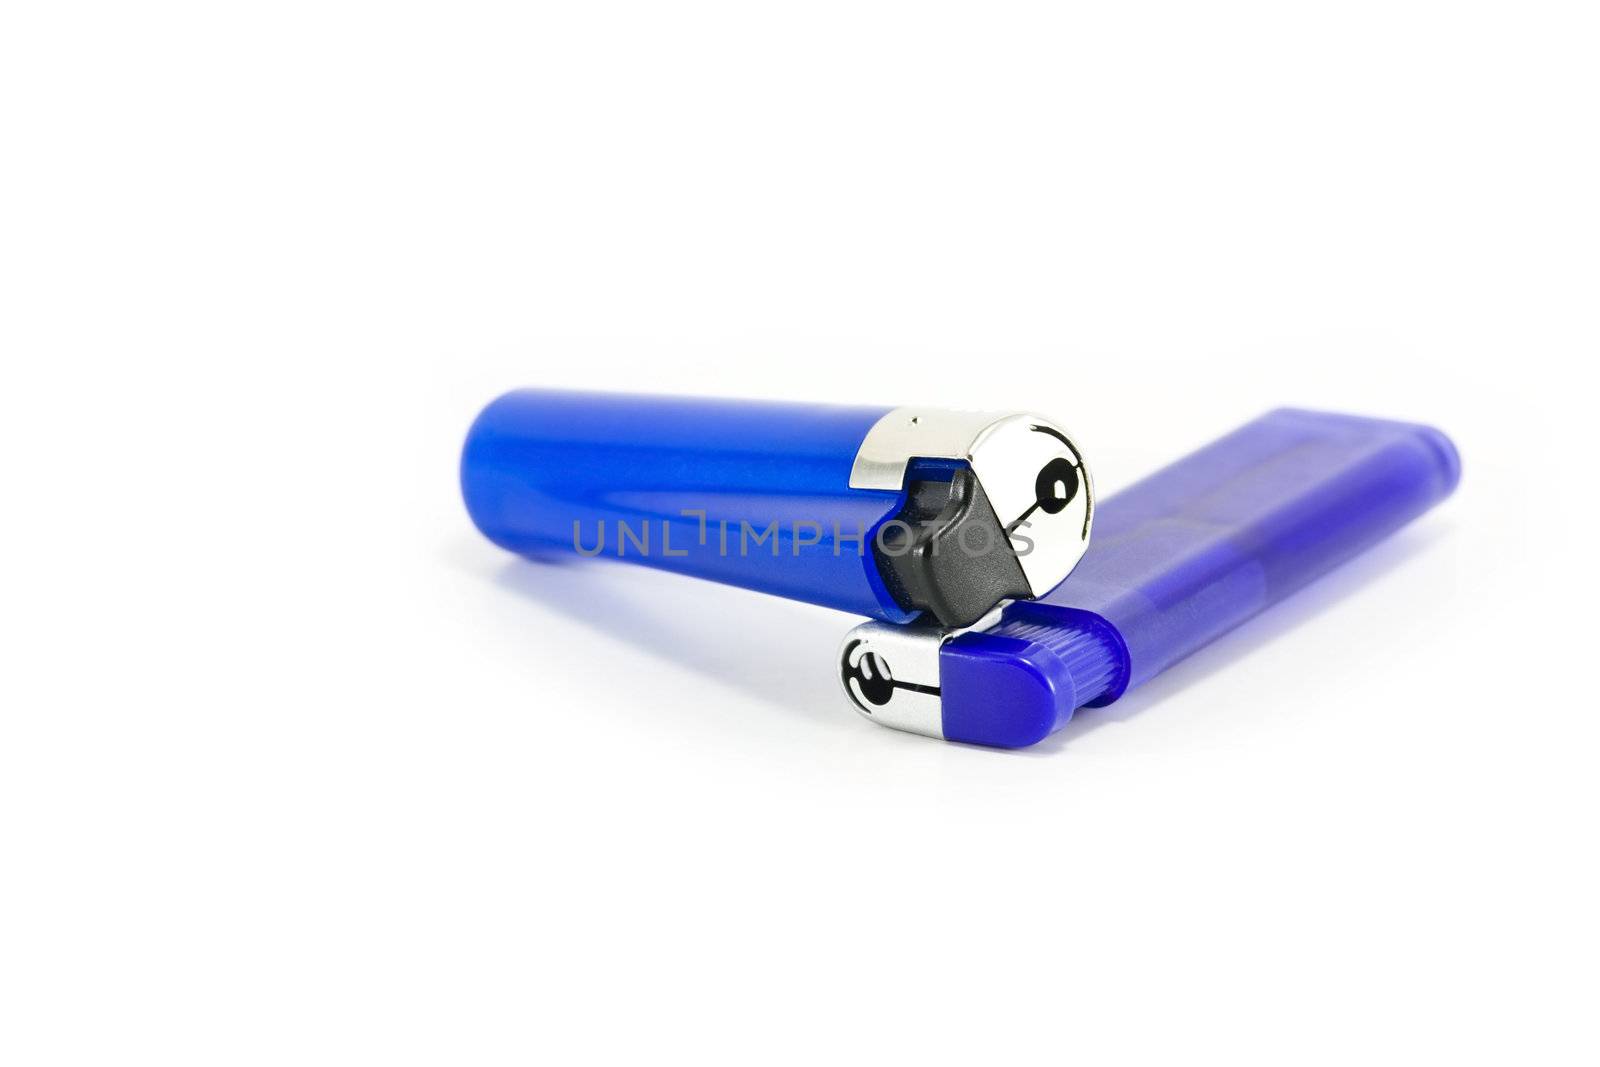 Two blue plastic lighters